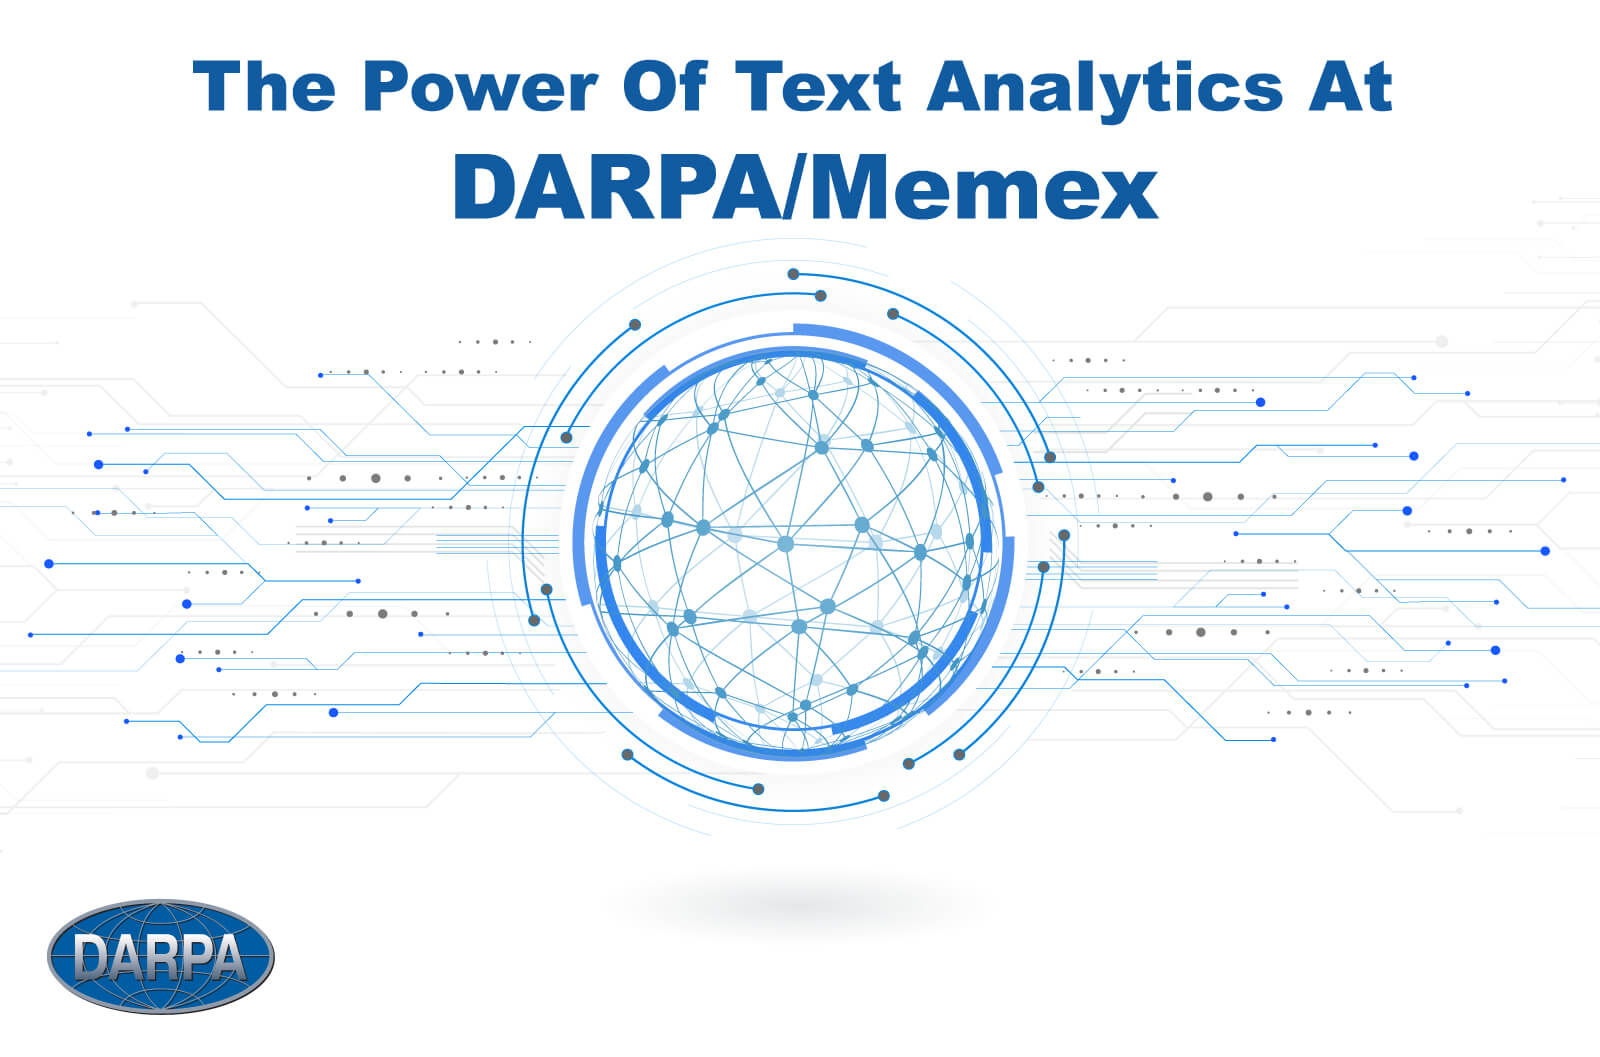 The Power of Text Analytics at DARPA/Memex